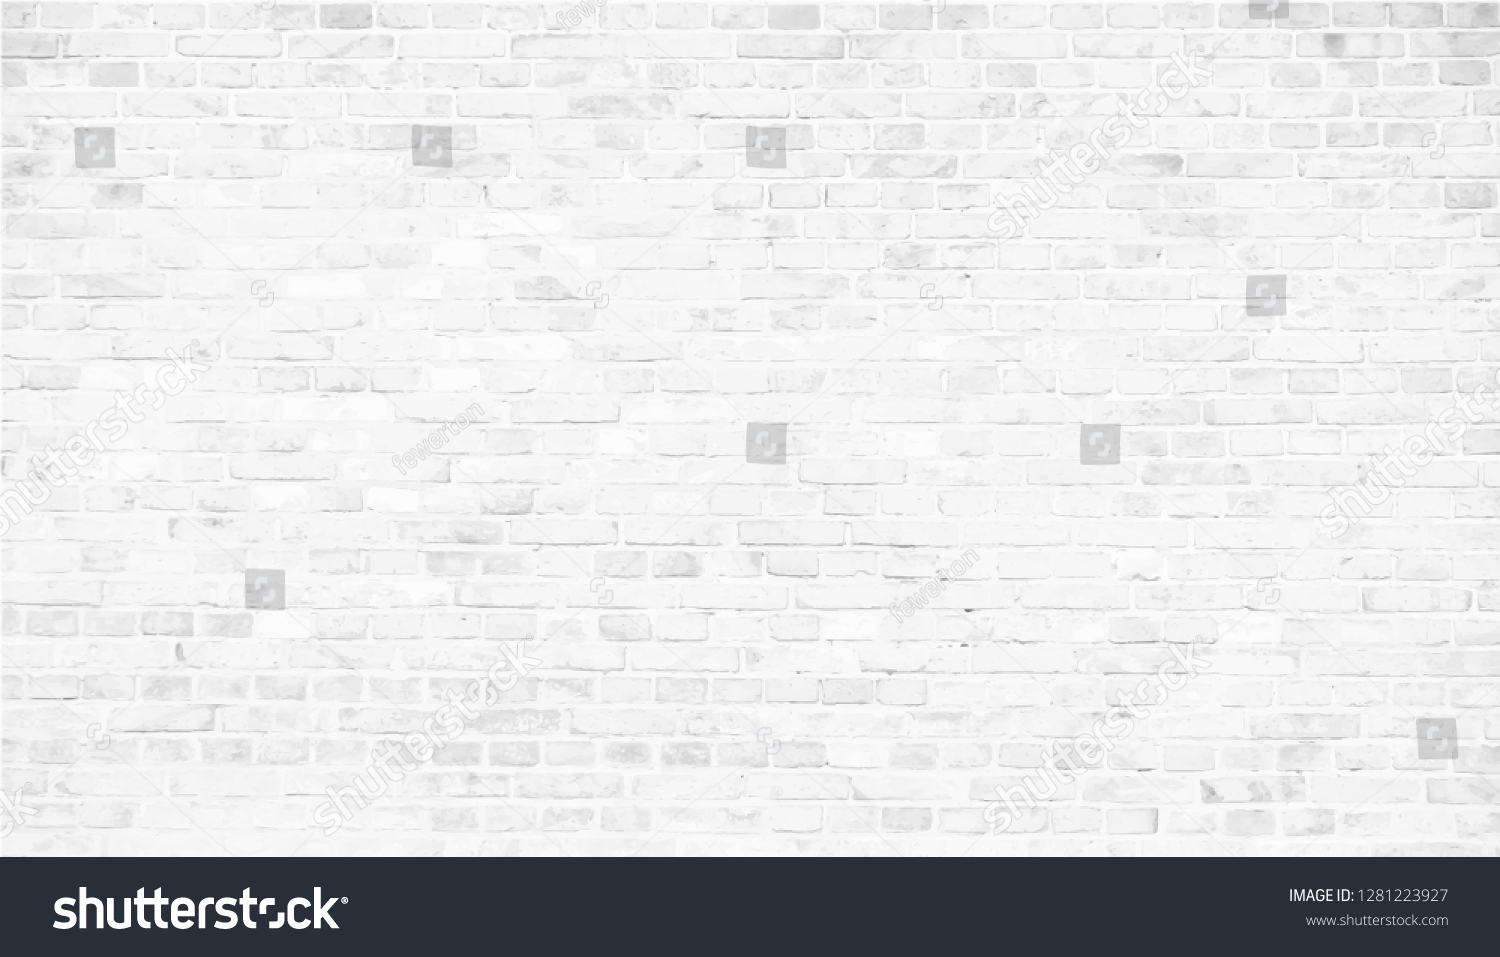 SVG of Simple grungy white brick wall with light gray shades seamless pattern surface texture background in wide panorama banner format. Vector illustration. svg